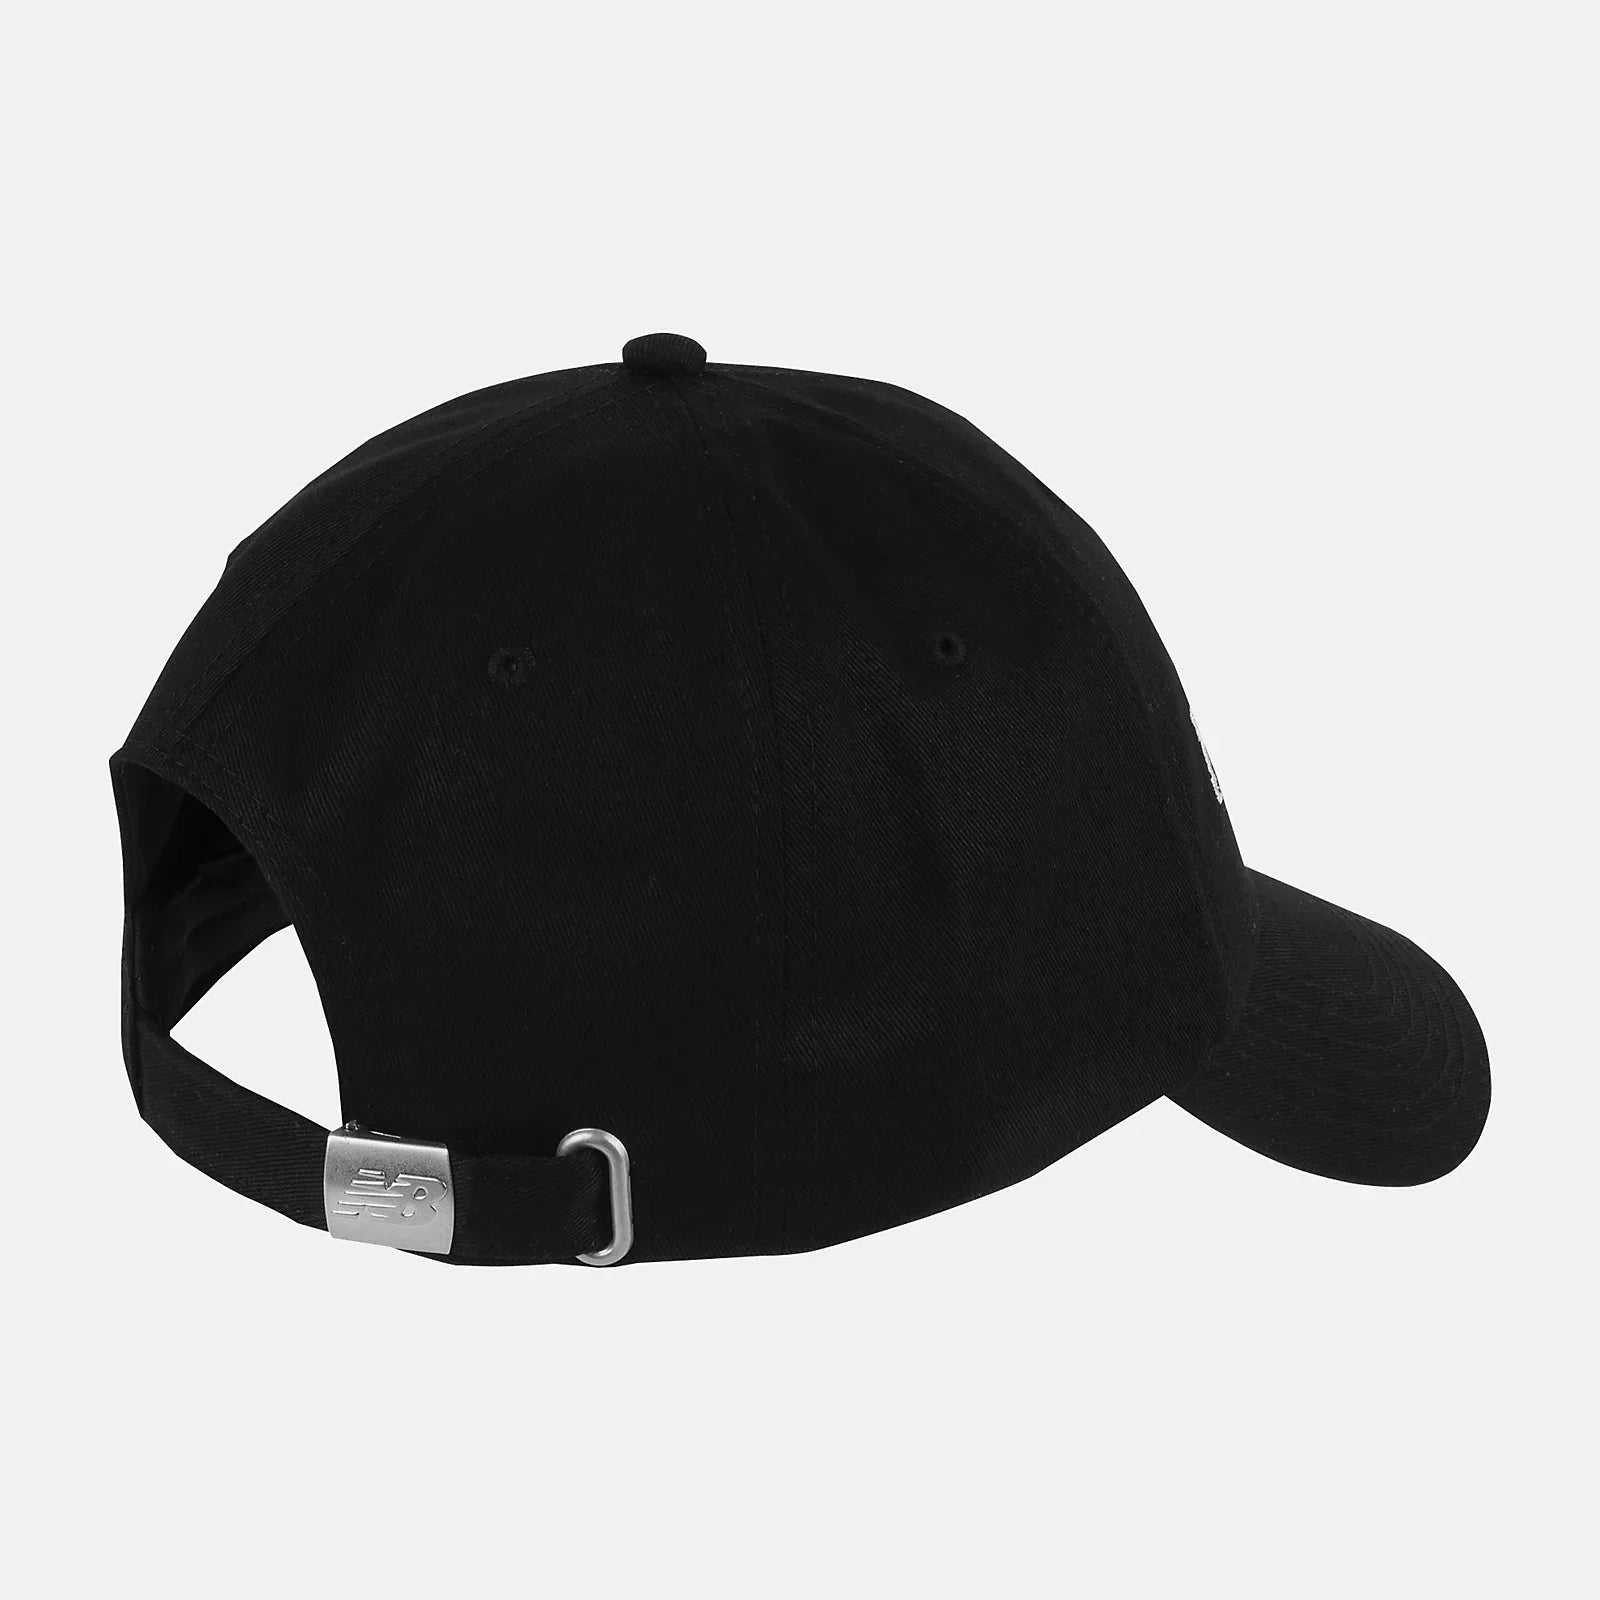 NEW BALANCE NB Logo Hat in Black LAH21002 O/S BLACK FROM EIGHTYWINGOLD - OFFICIAL BRAND PARTNER